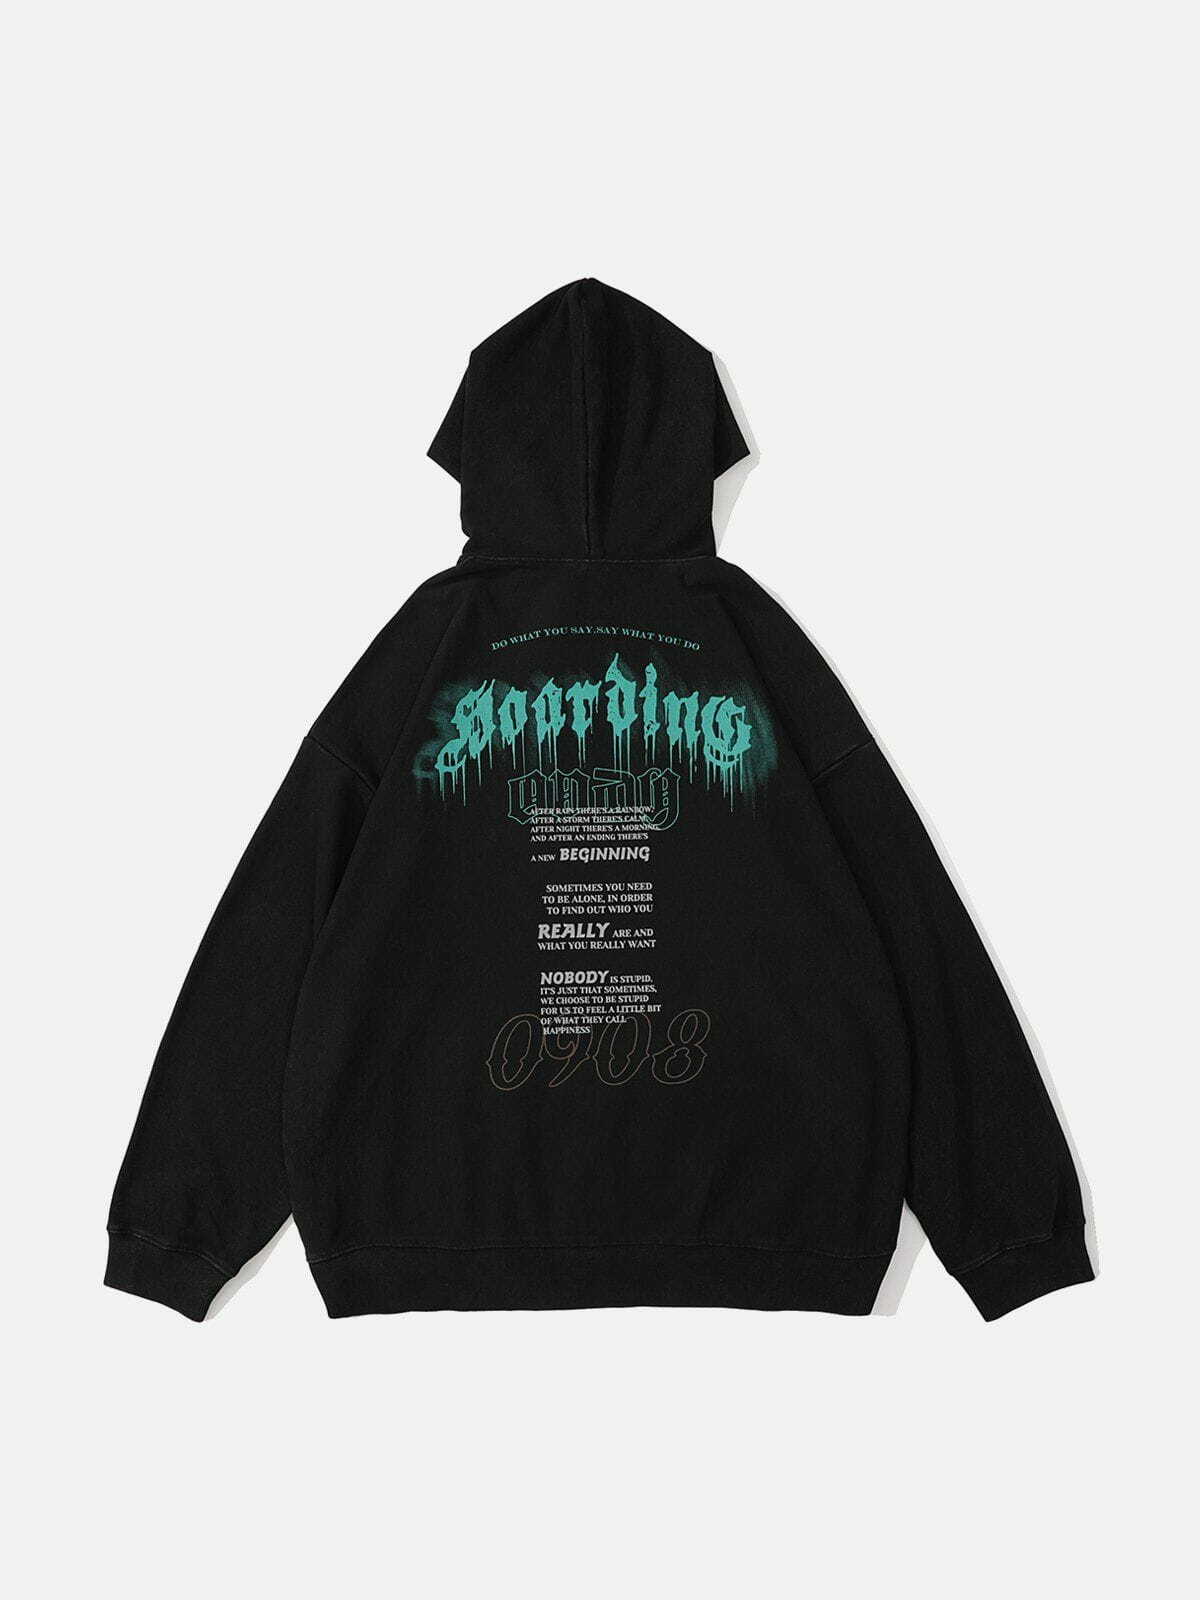 washed chronofossil print hoodie edgy streetwear 6534